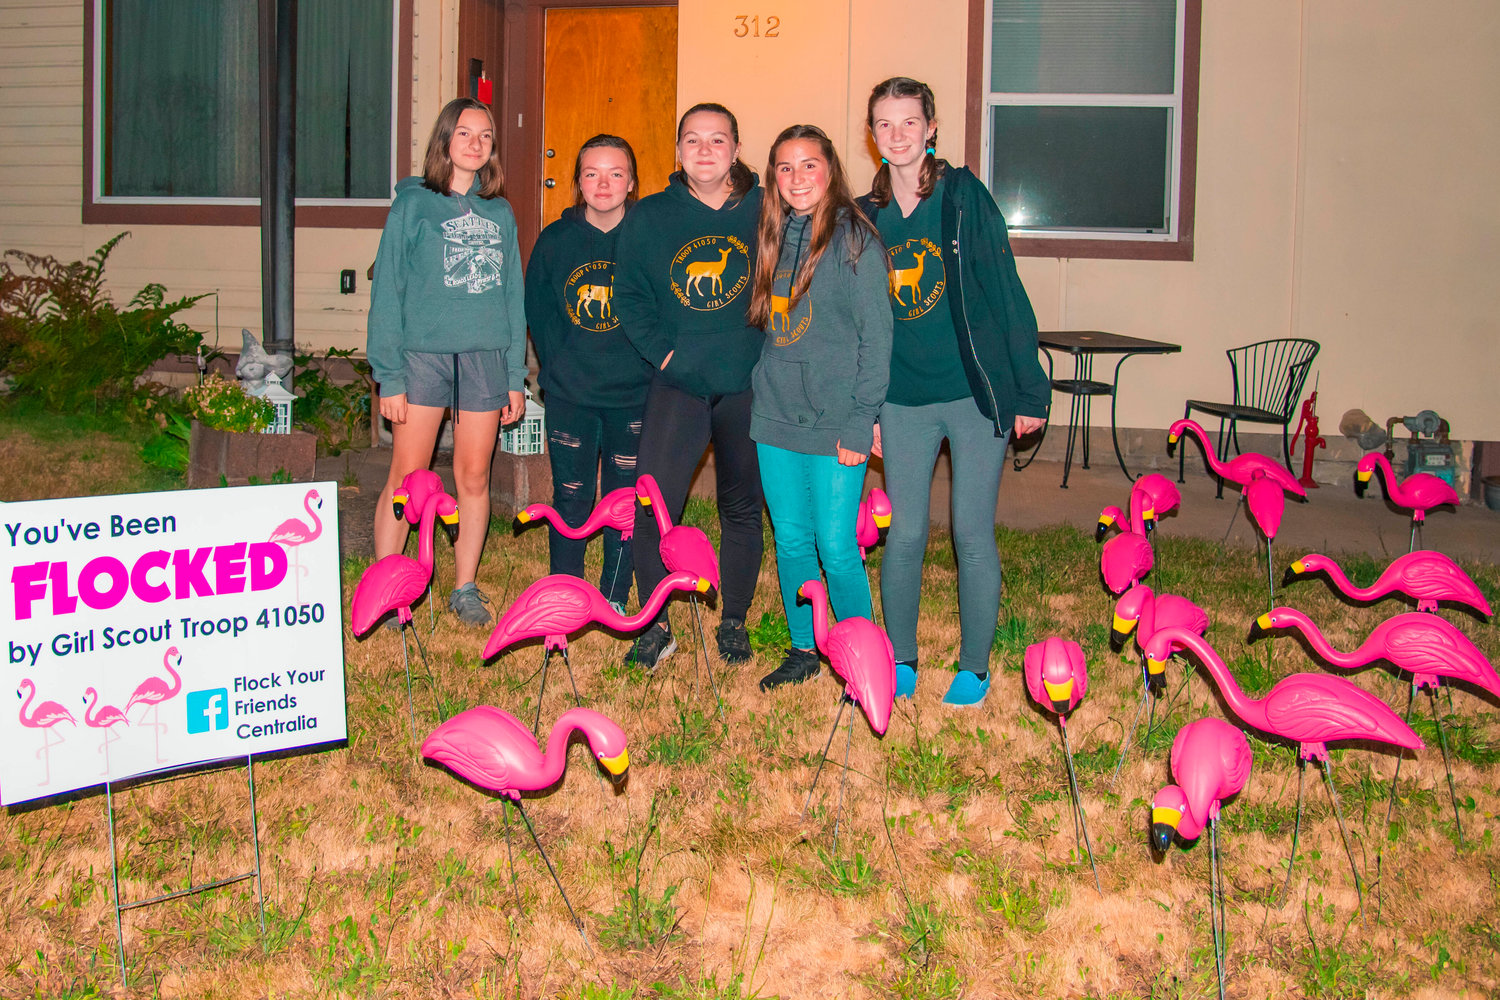 Payton Hile, Kimberlie Bruner, Natalia Hedgers, Olivia Hedgers and Susannah Berry with Troop 41050 pose for a photo next to flamingos after a flocking in Centralia on Wednesday. Not pictured is troop member Layla VonWald.